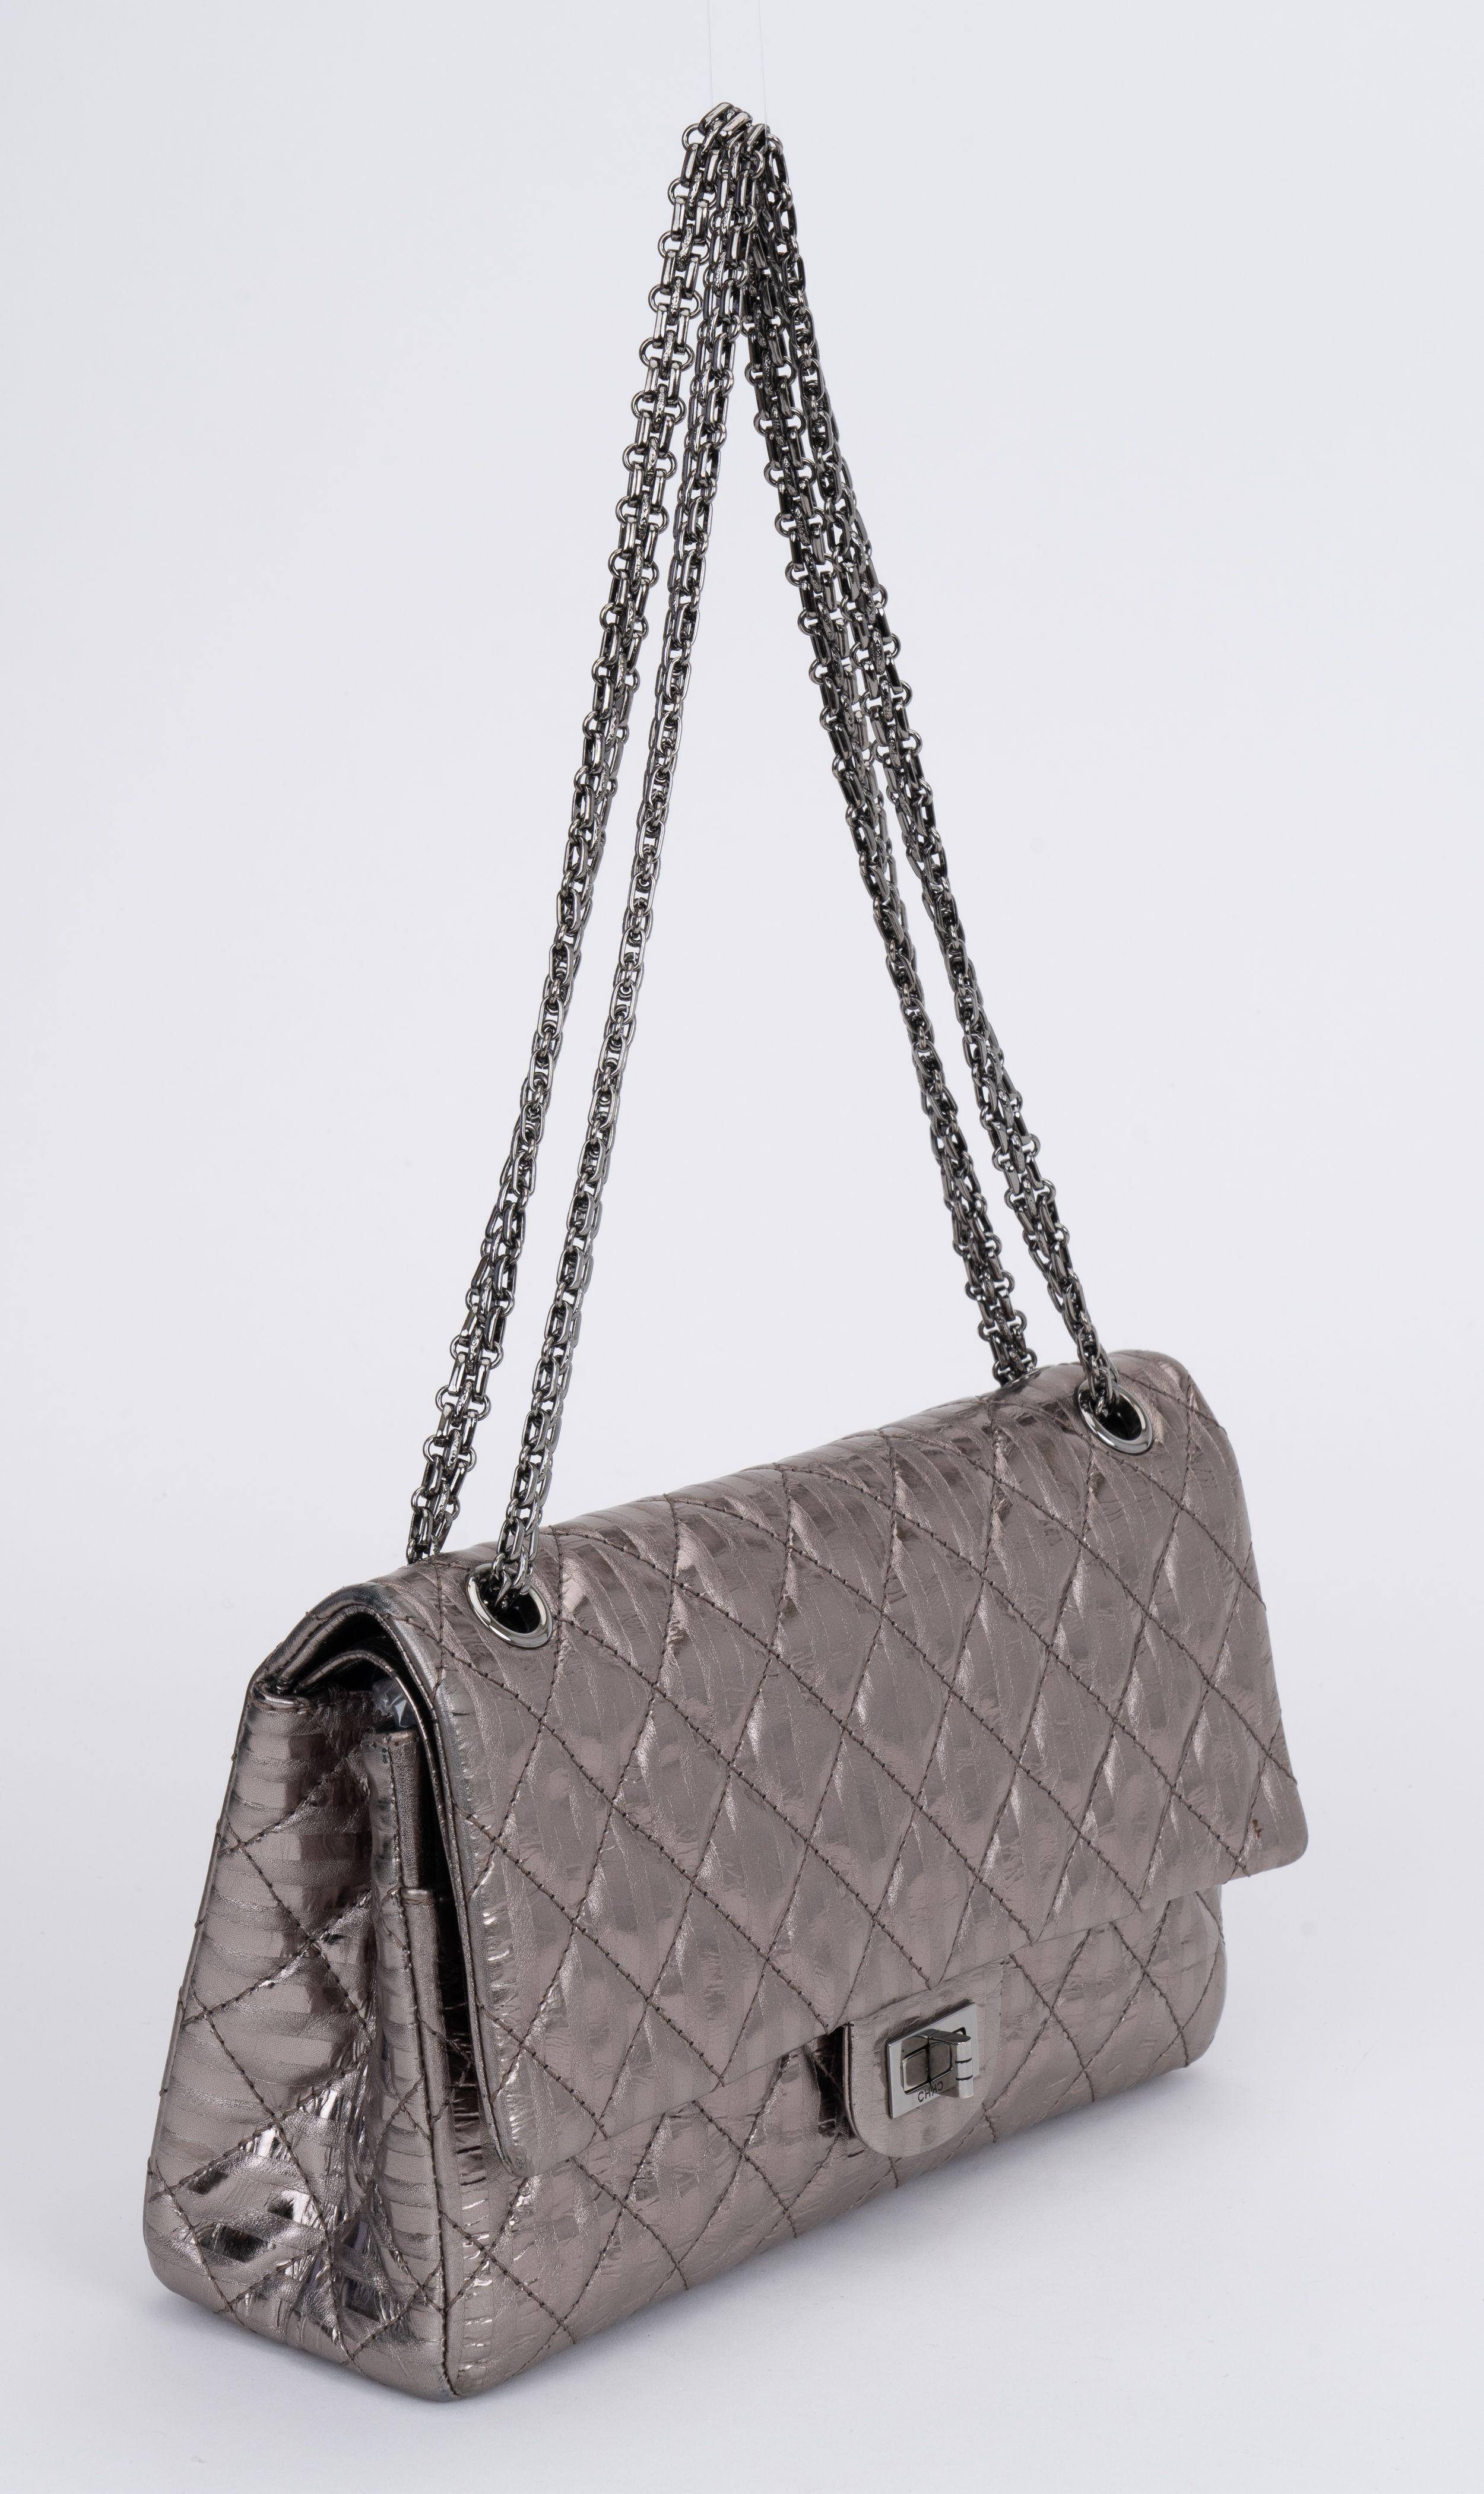 Chanel reissue double flap in platinum leather and gunmetal hardware. 